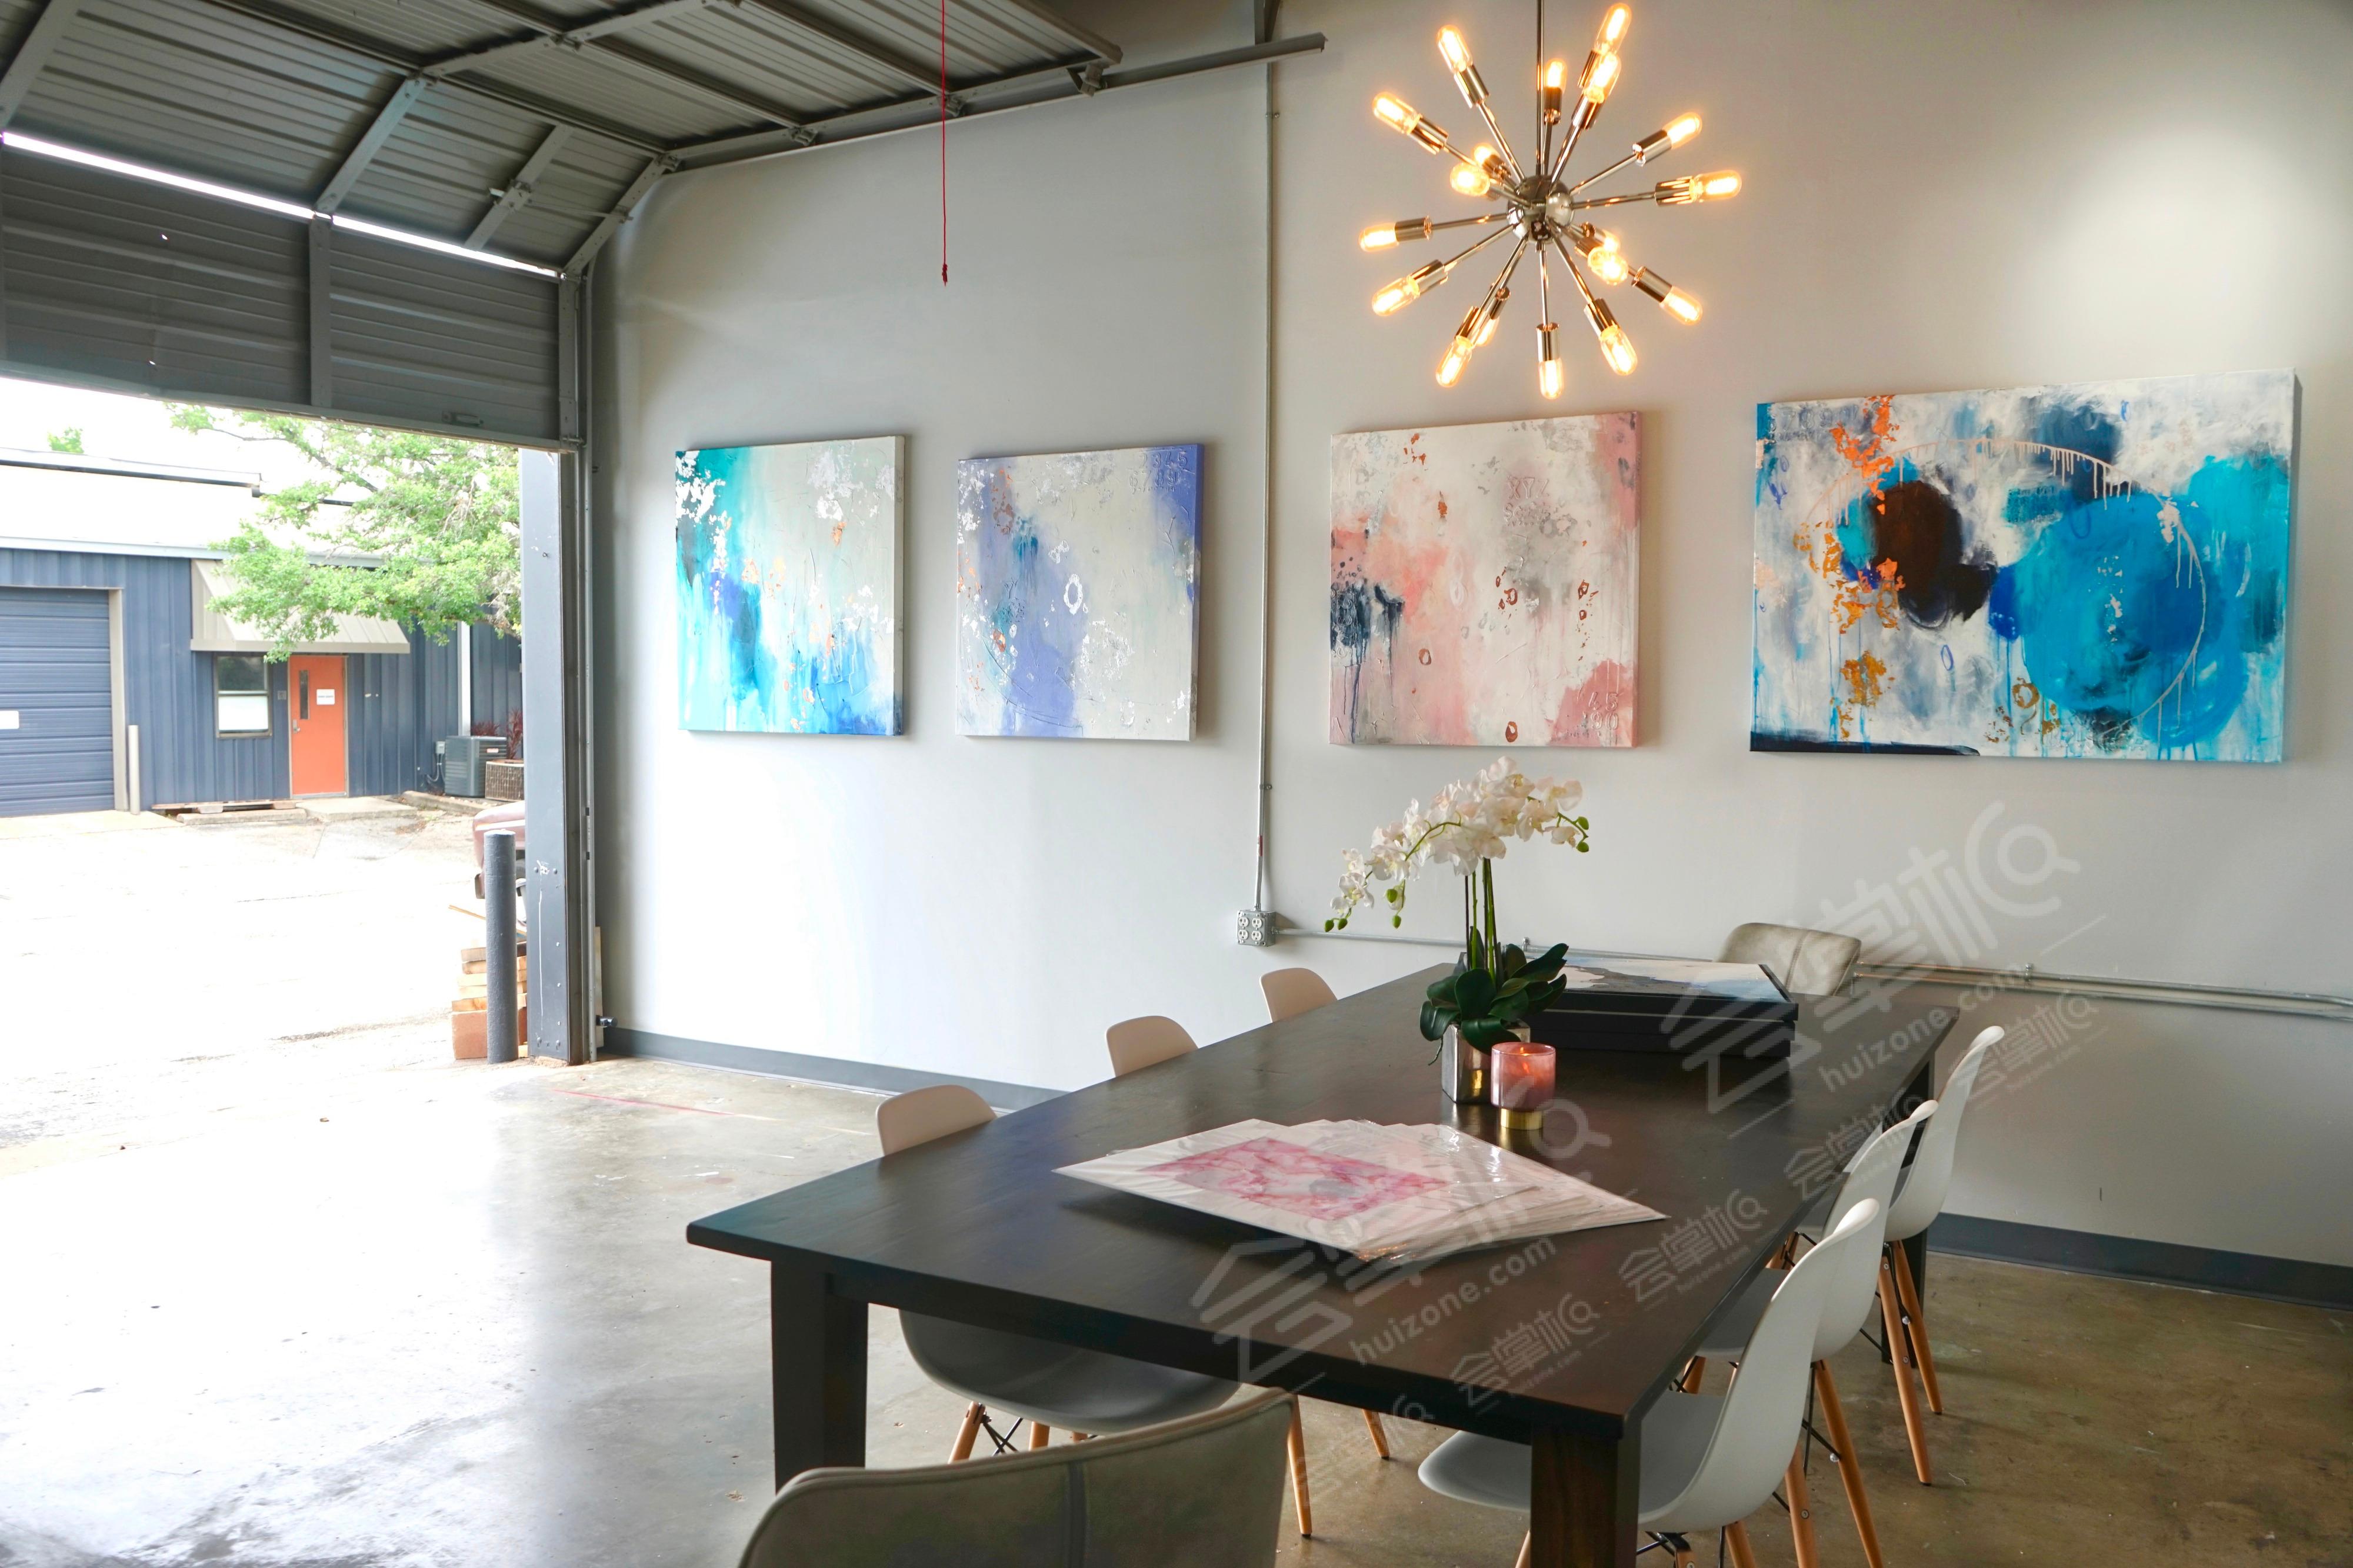 Modern Industrial Chic Event Space Minutes from Downtown